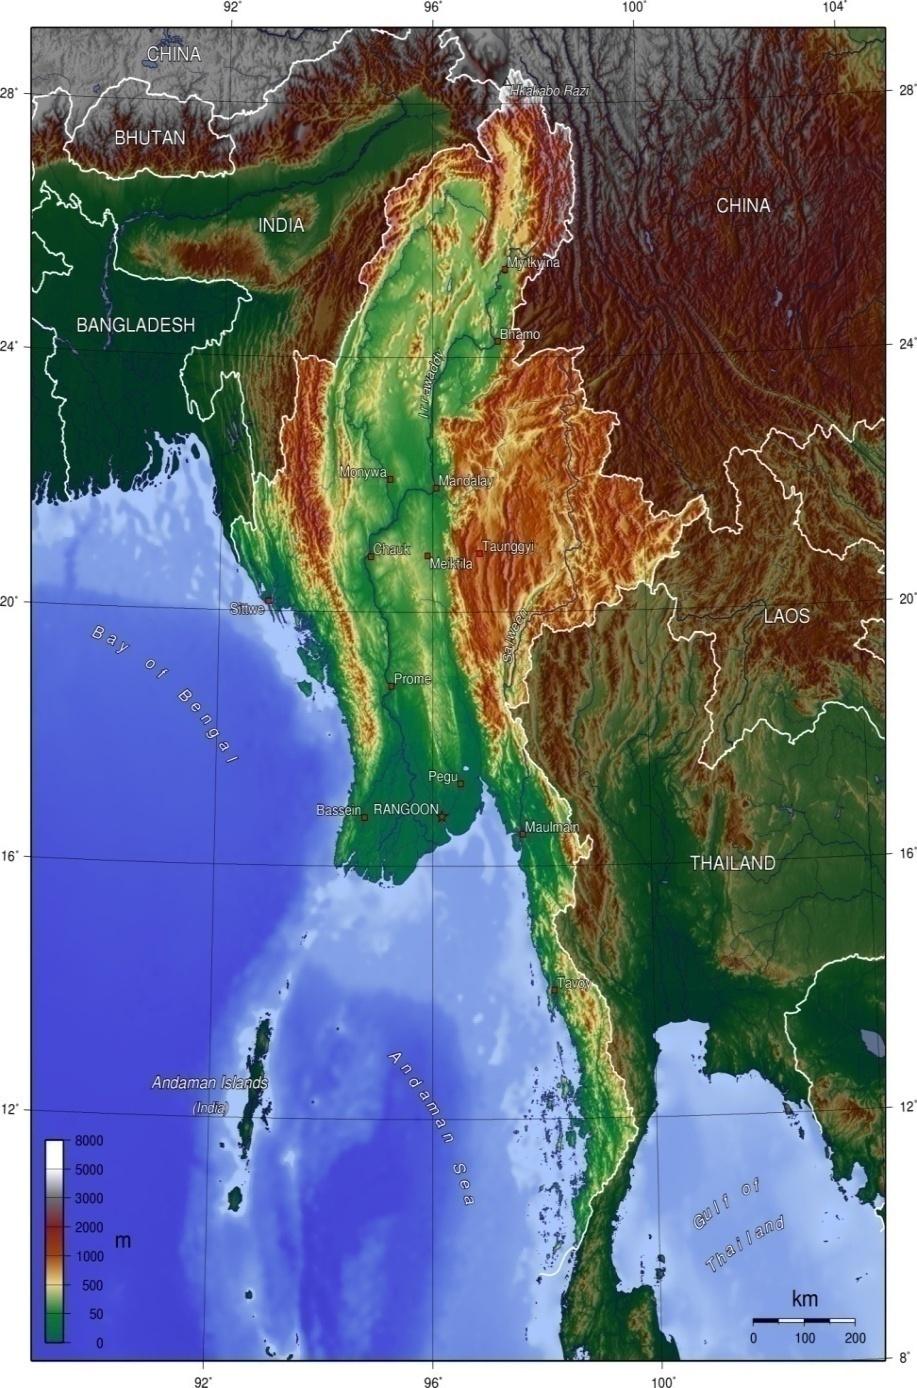 The Climate of Myanmar lies in the monsoon region of Asia.